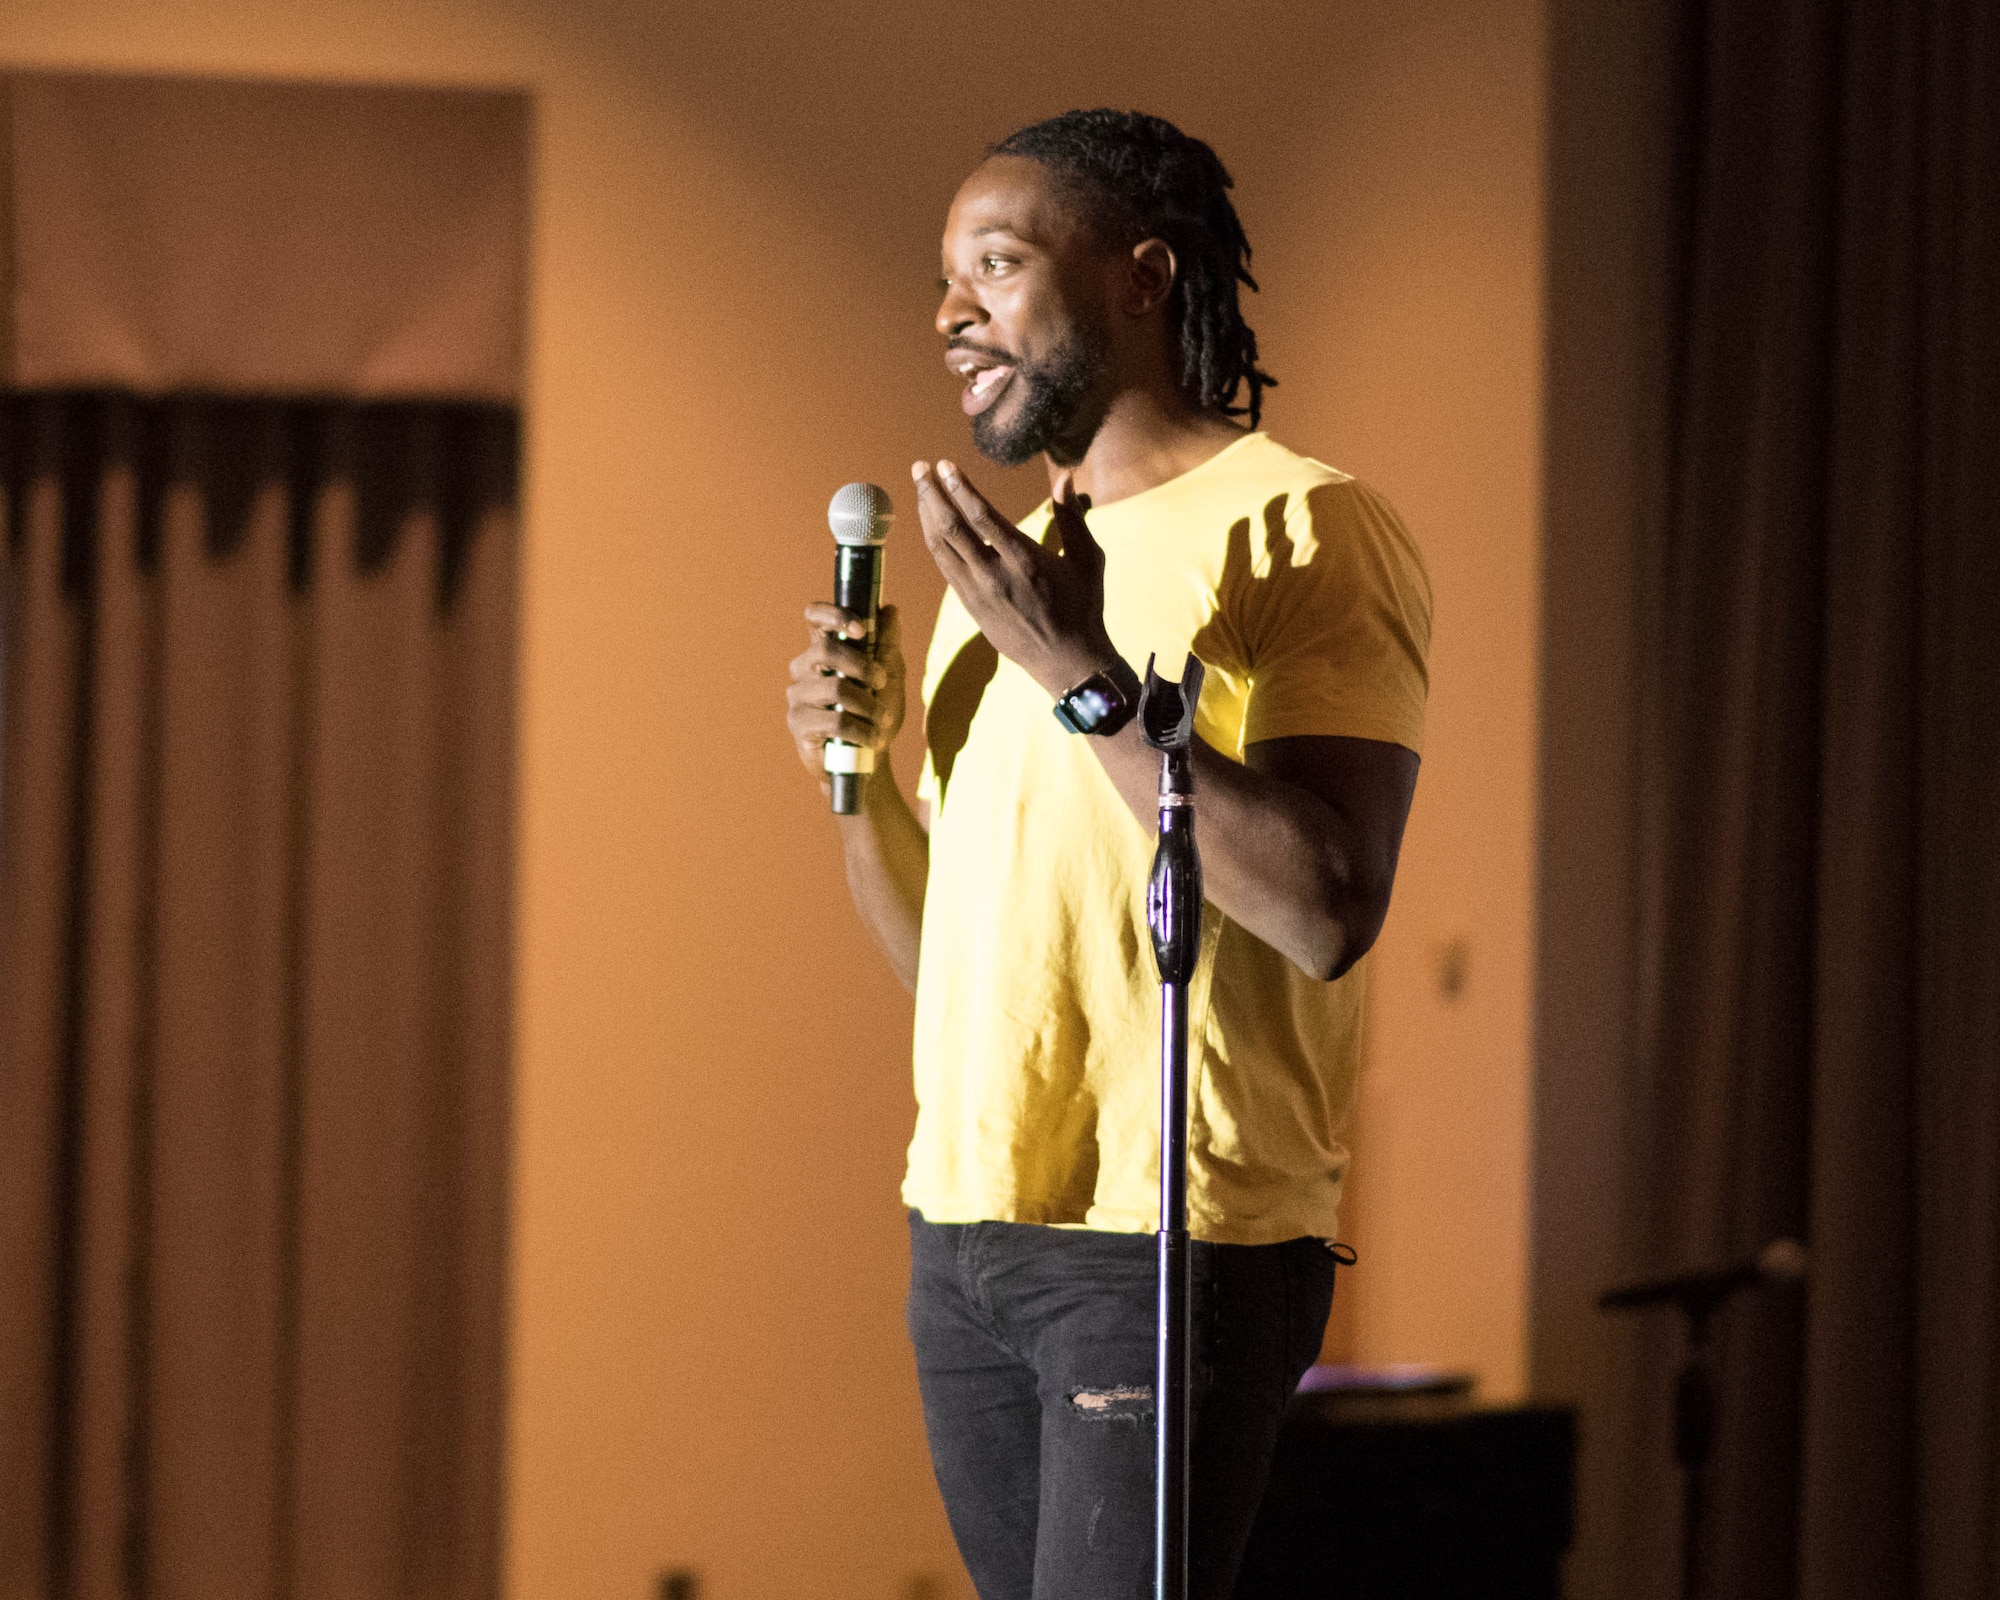 Preacher Lawson, a stand-up comedian, performs at The Landings on Dover Air Force Base, Delaware, Aug. 27, 2021. Lawson has been performing since he was 17 years old and was a finalist on season 12 of America’s Got Talent. (U.S. Air Force photo by Mauricio Campino)